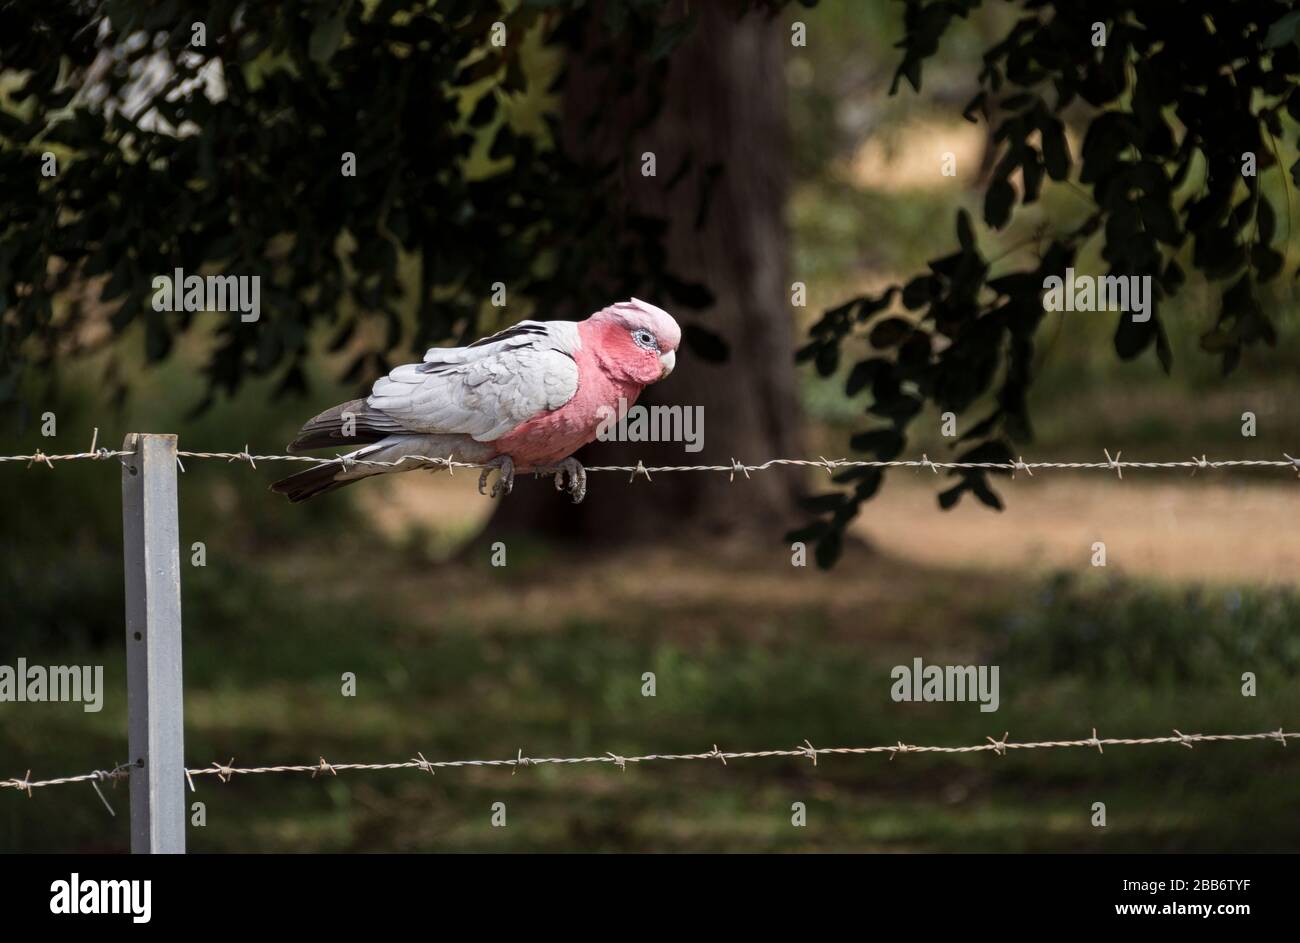 Rose breasted cockatoo sitting on a wire fence, Western Australia, Australia Stock Photo